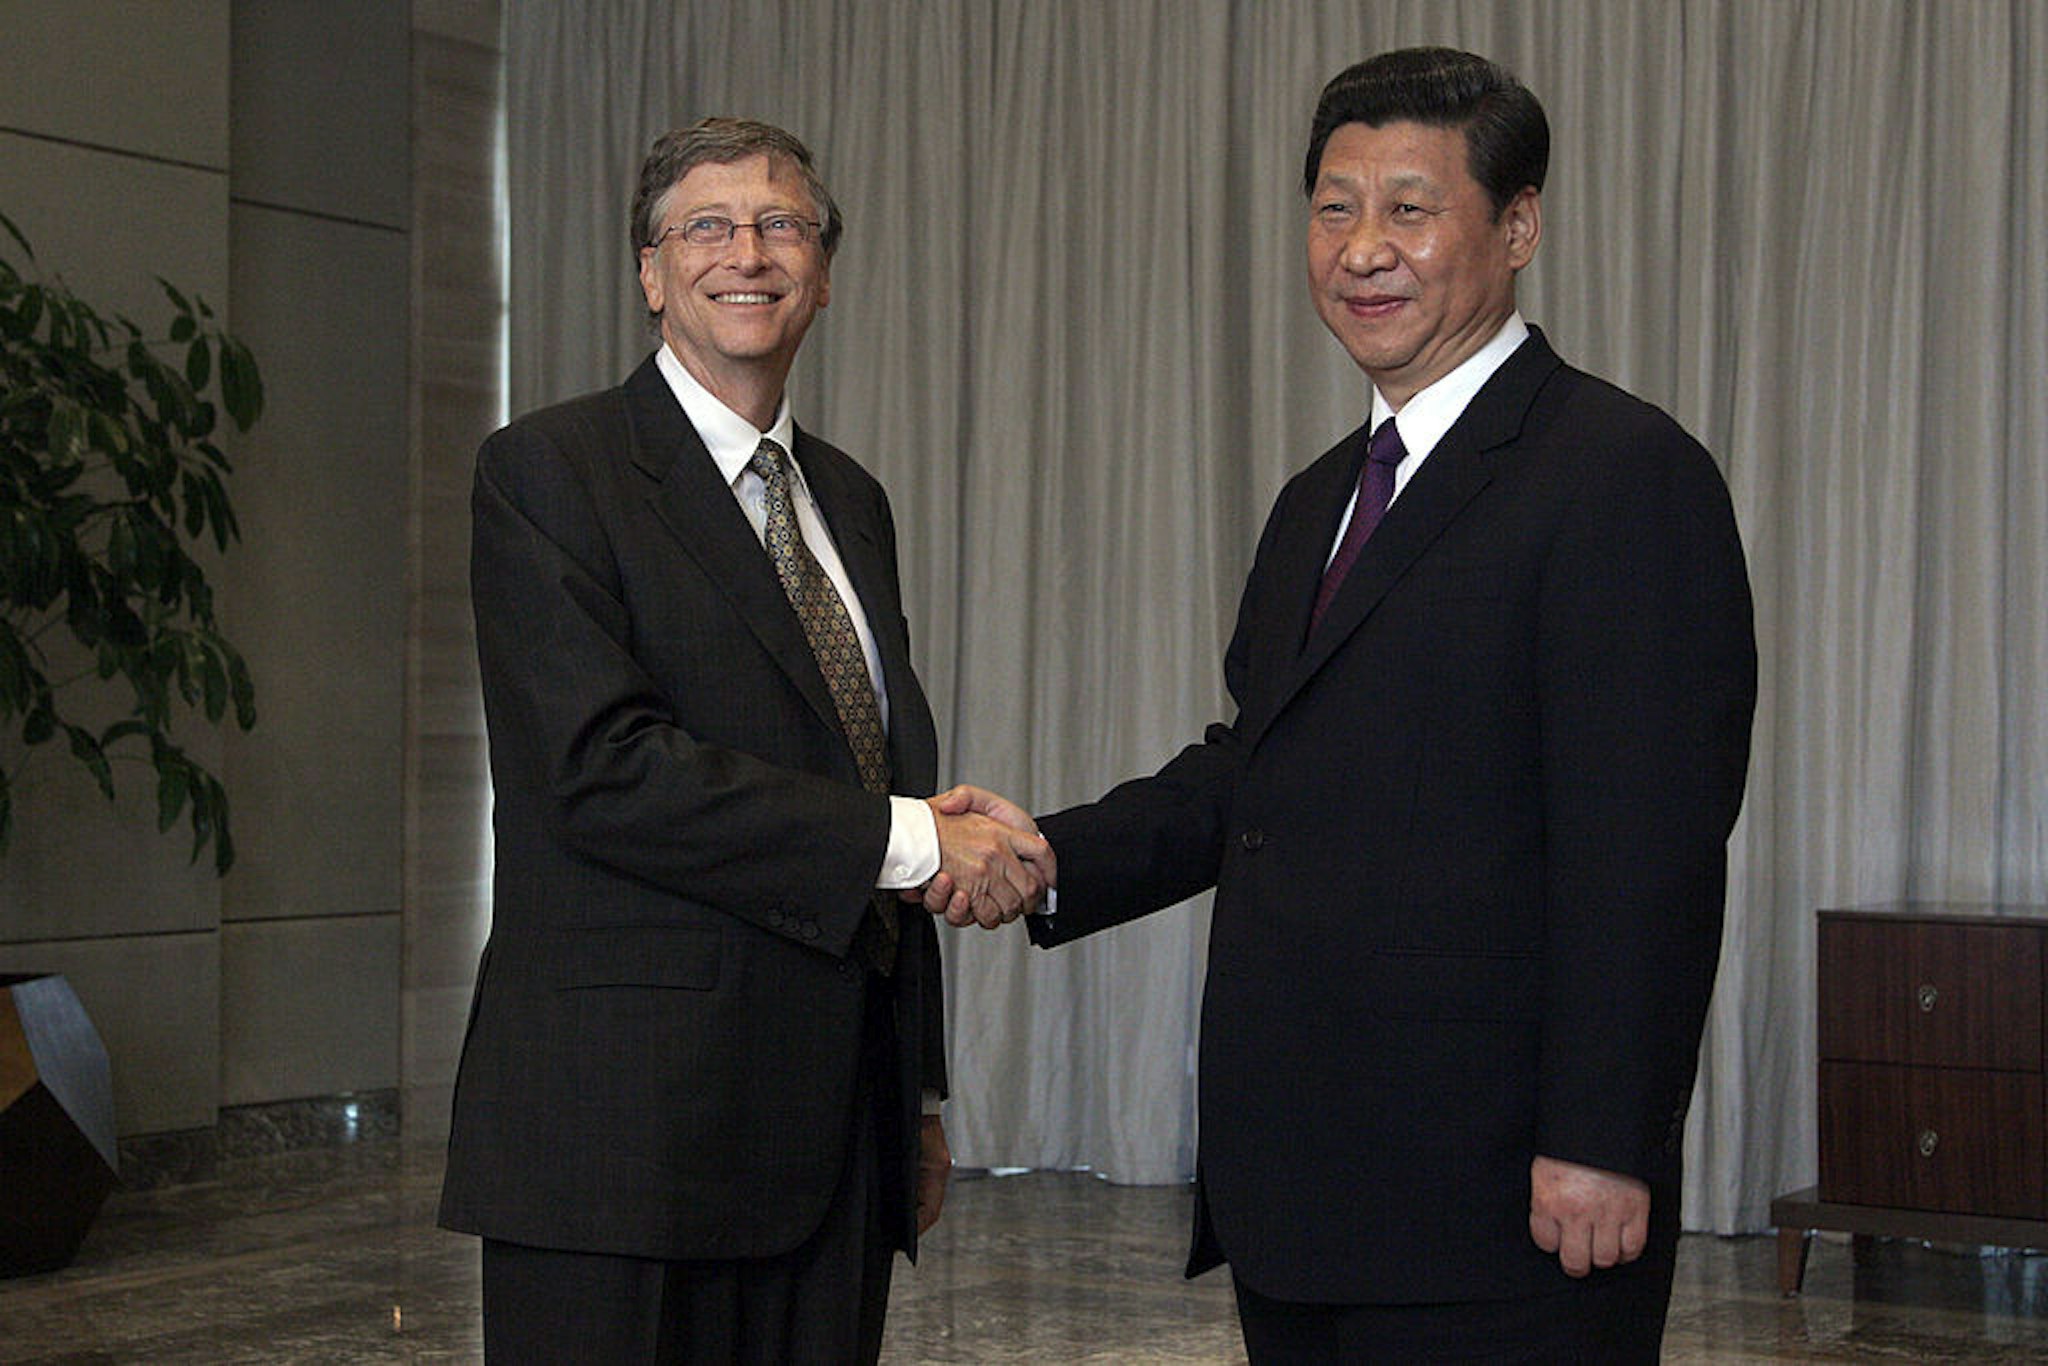 China's President Xi Jinping (R) shakes hands with Microsoft founder Bill Gates during the Boao Forum for Asia (BFA) annual conference in Boao on the southern Chinese resort island of Hainan on April 8, 2013. State and government leaders from Asia and other regions have been invited to attend three-days of economic meetings for the annual Boao Forum for Asia in Boao, a coastal town in south China's Hainan Province. AFP PHOTO / POOL /Tyrone Siu